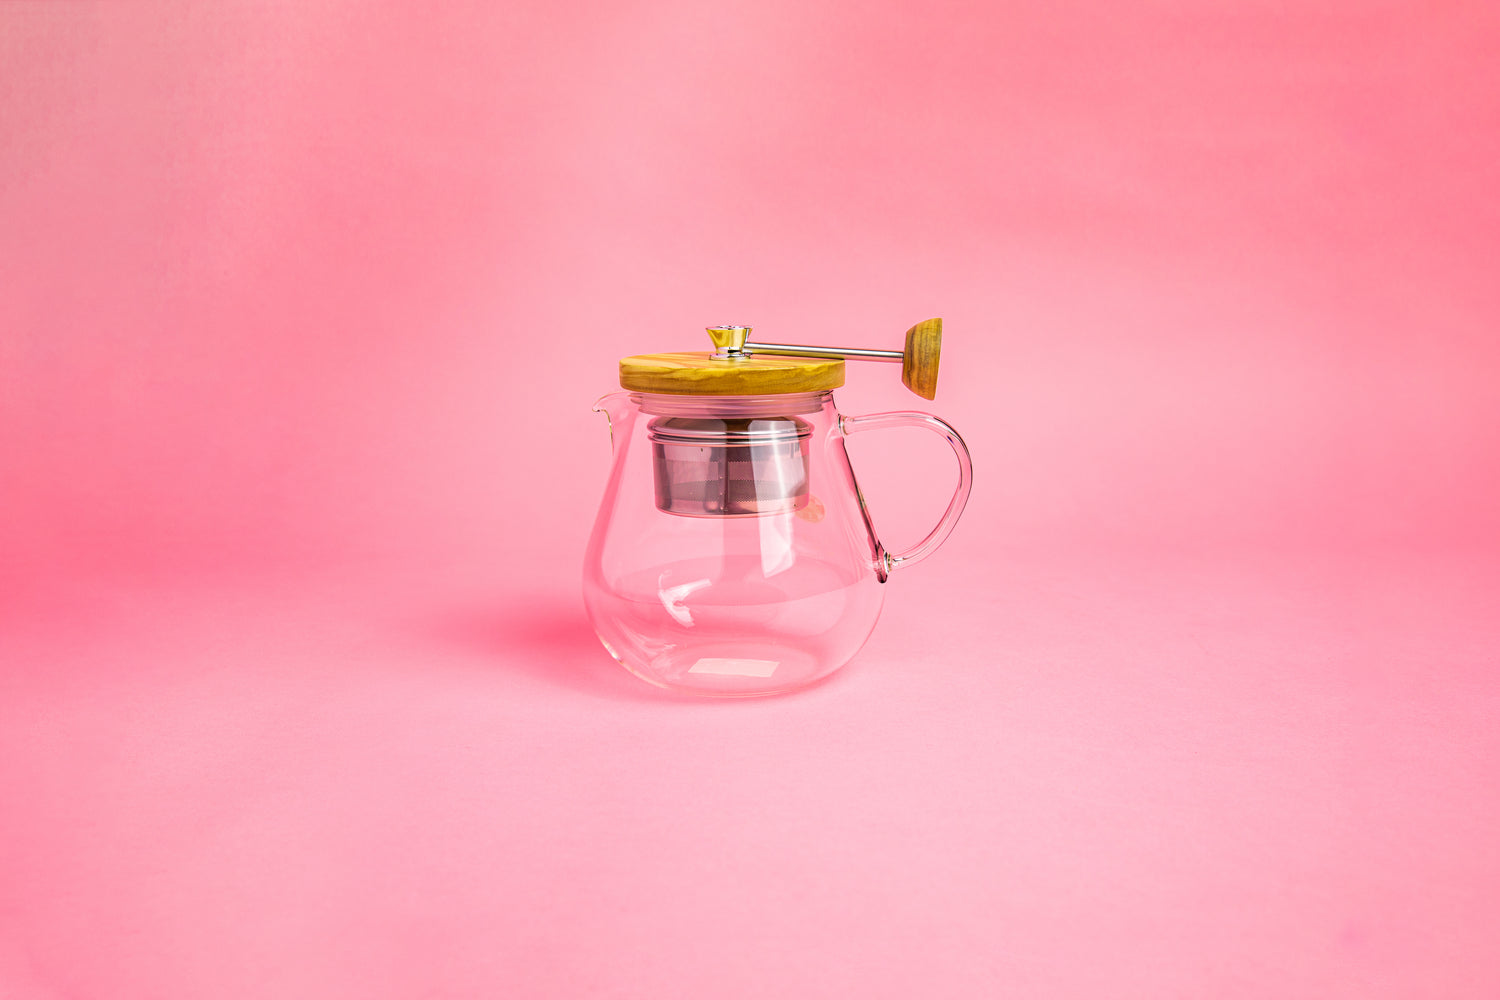 Glass teapot with glass handle. Olive wood lid and knob. Steel rod with a steel tea filter basket.  set on pink gradient background